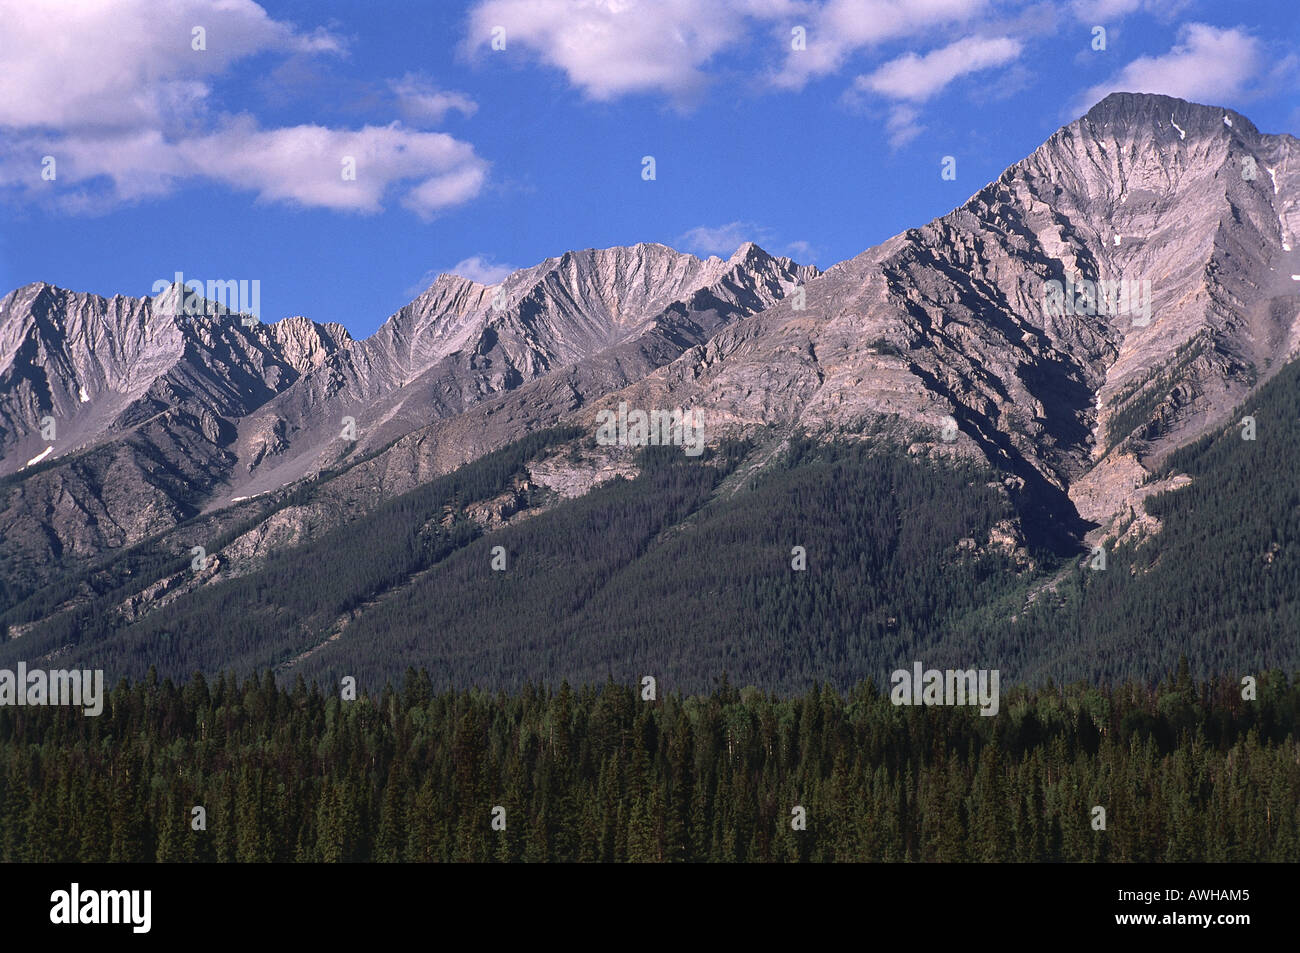 Canada, Pacific Northwest, Kootenay National Park, Rocky Mountains, dramatic peaks rising above forested terrain Stock Photo